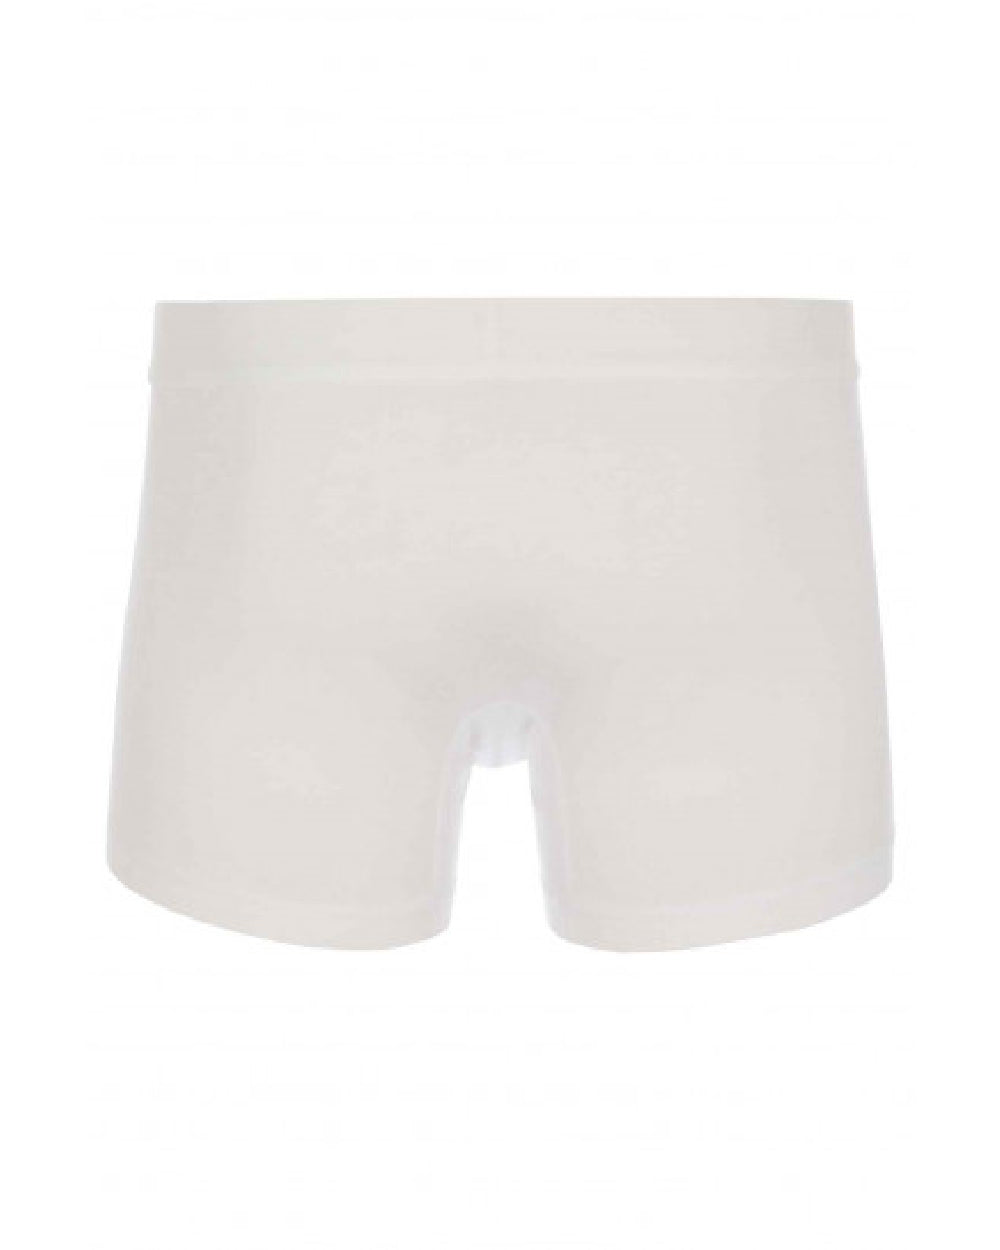 HJ Hall 2 Pack Cotton Stetch Trunks in White 